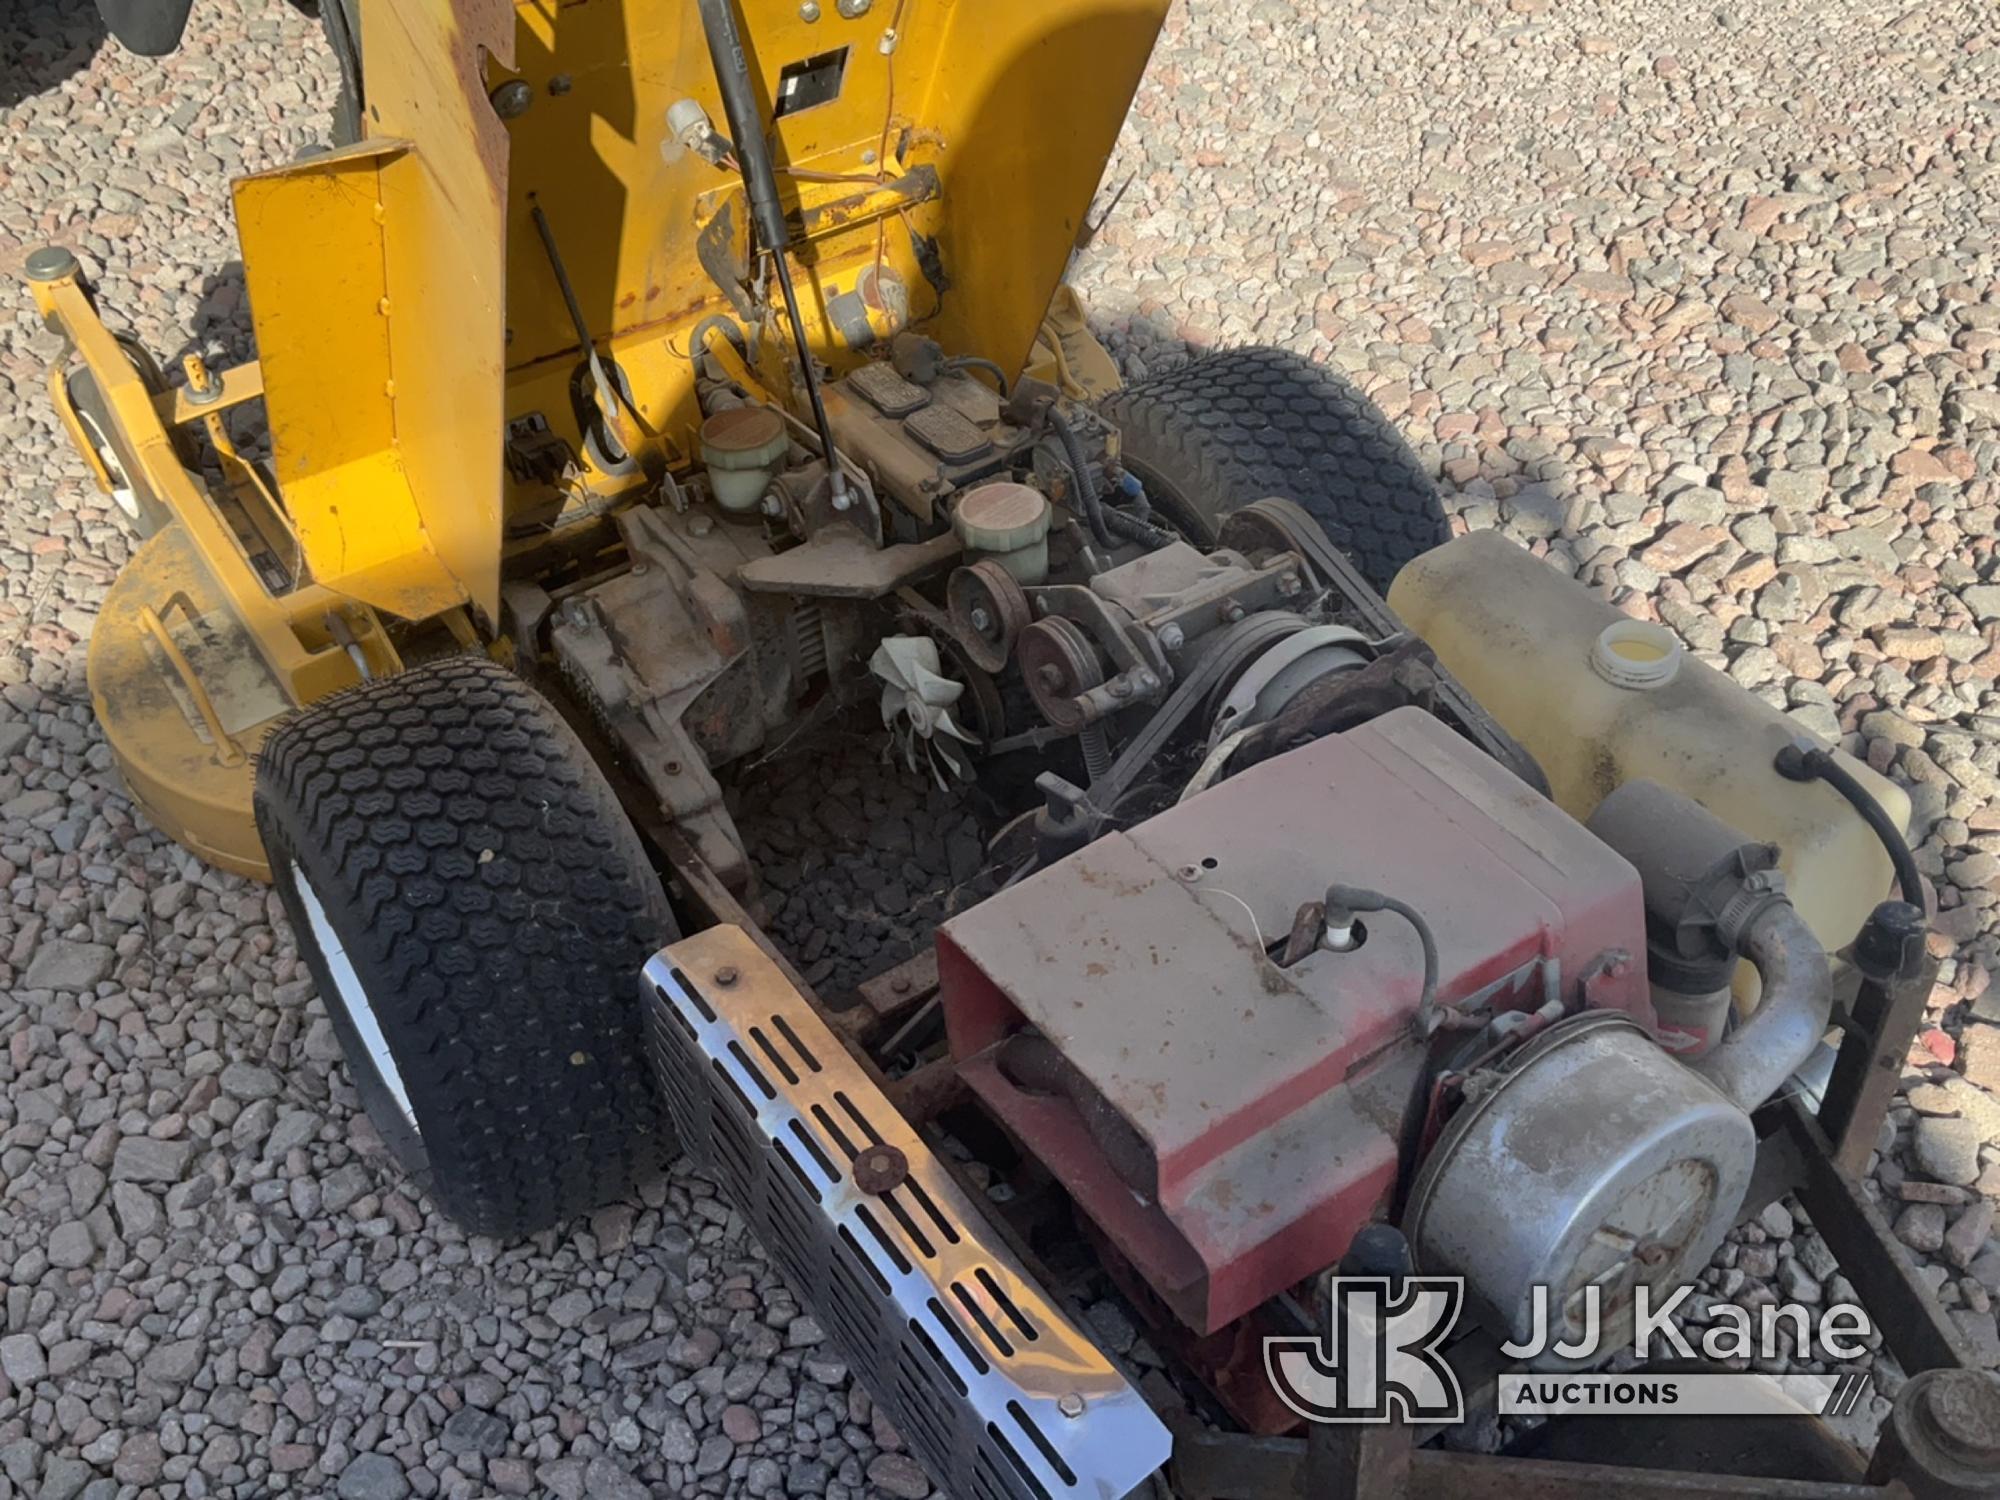 (Dixon, CA) Walker Ride On Mower Not Running, Missing Gas Cap, Flat Tire, Conditions Unknown